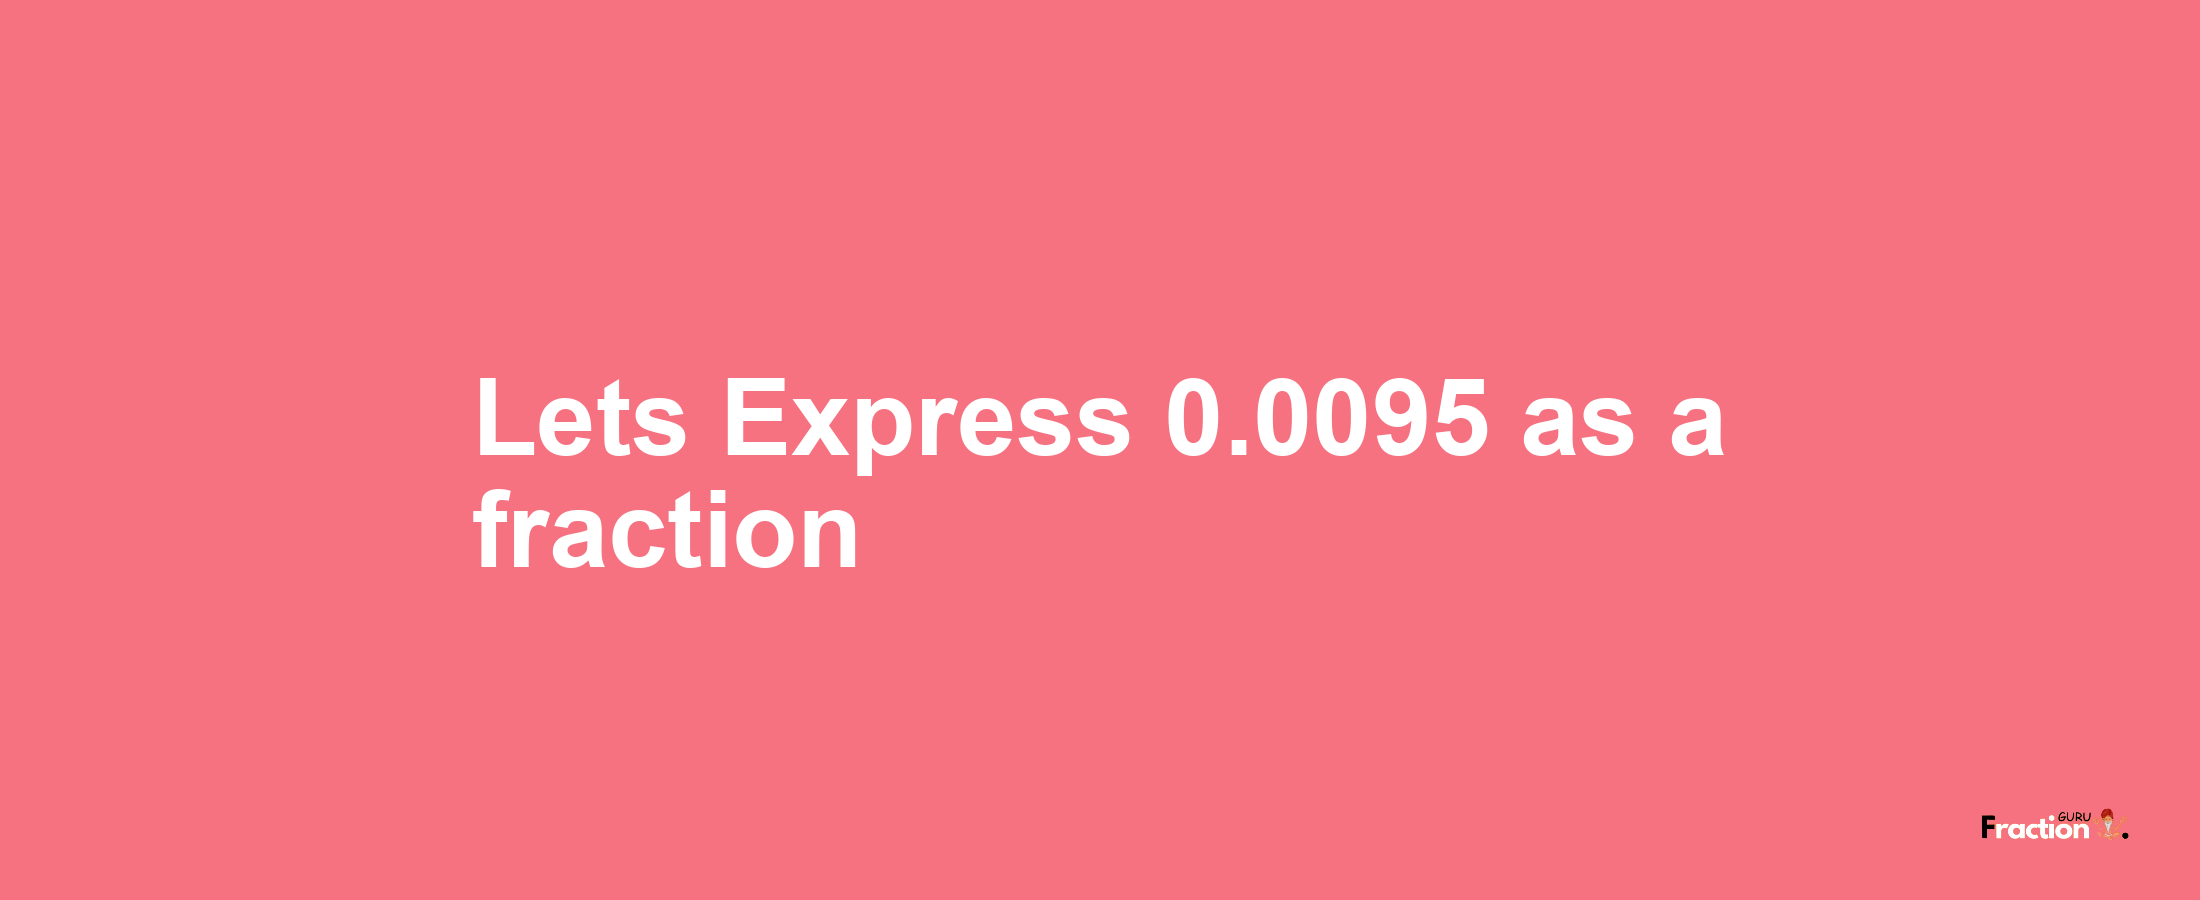 Lets Express 0.0095 as afraction